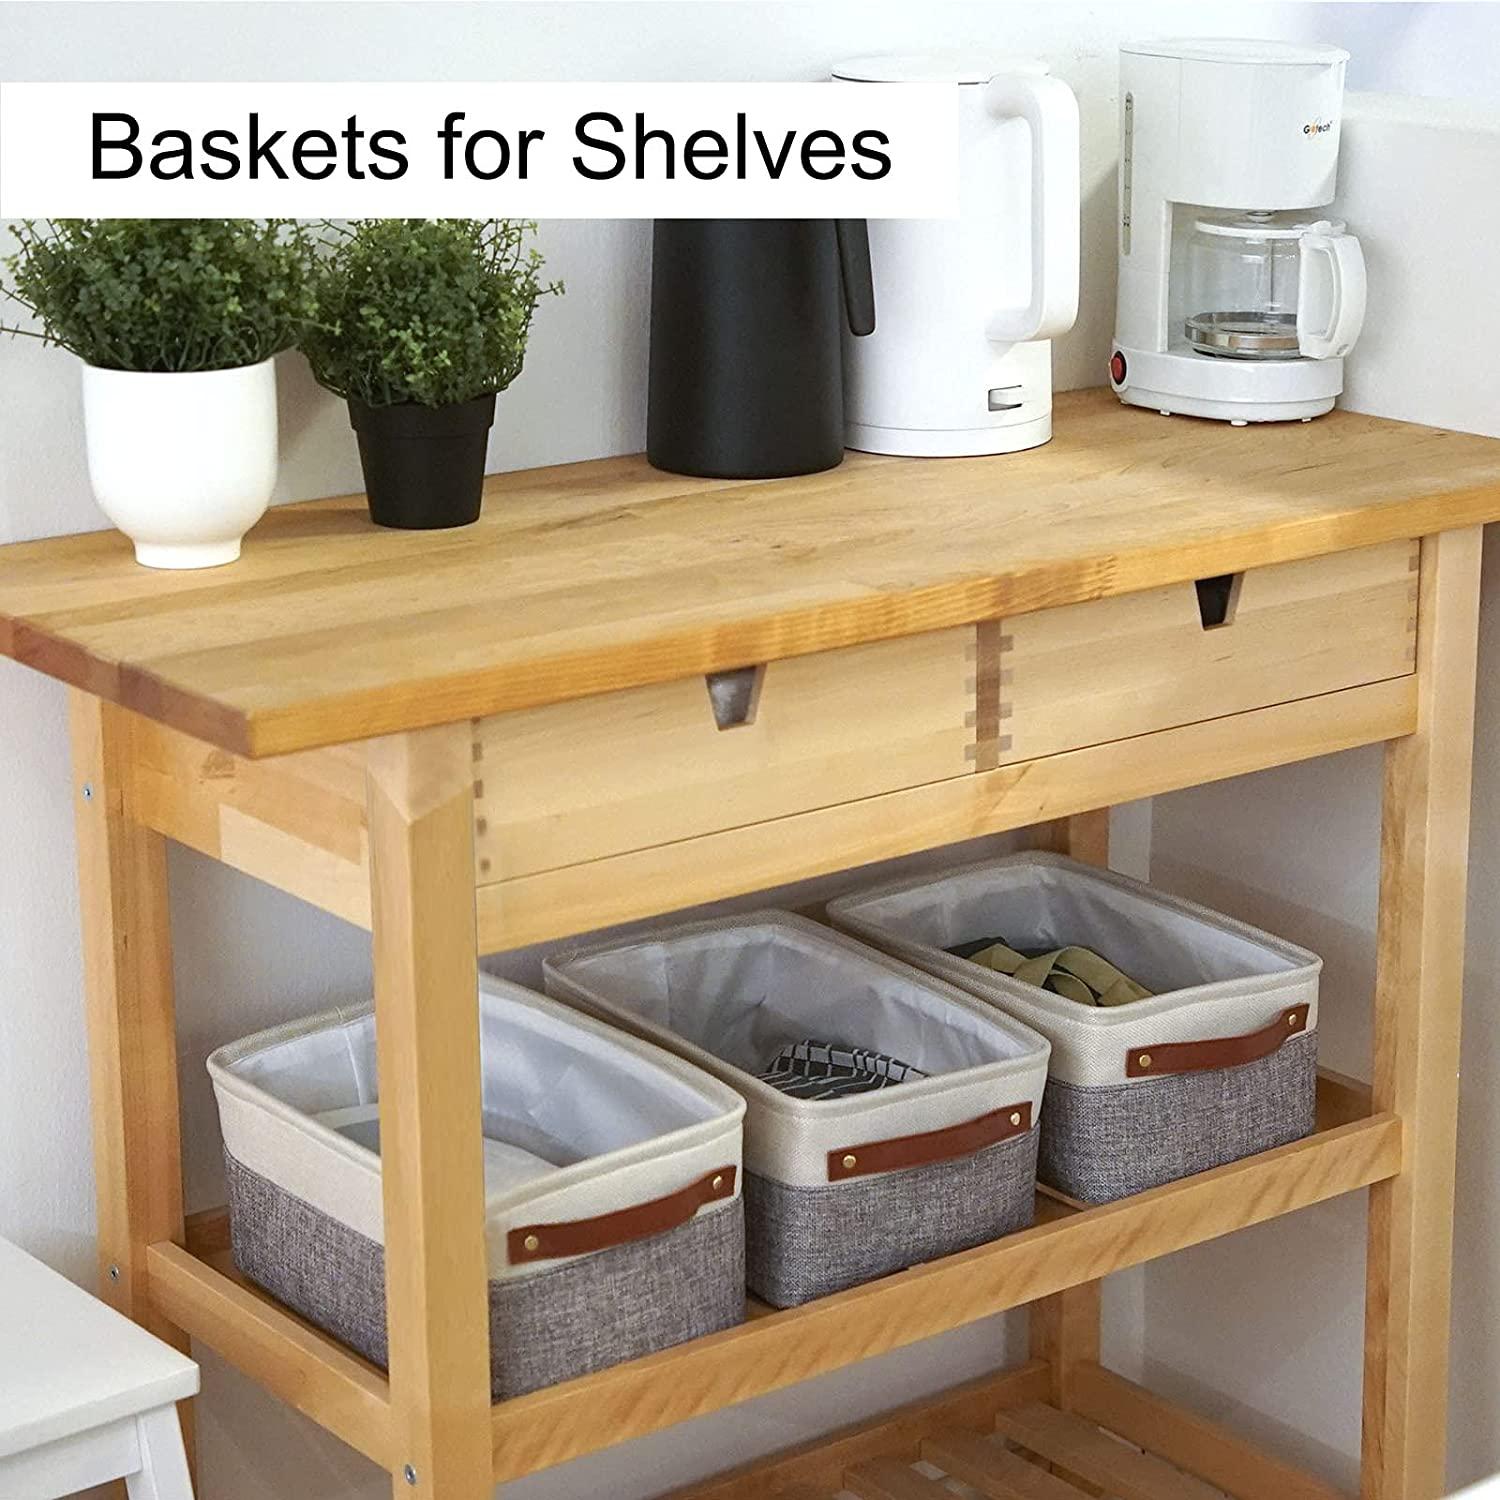 HNZIGE Small Storage Baskets for Organizing(6 Pack) Fabric Baskets